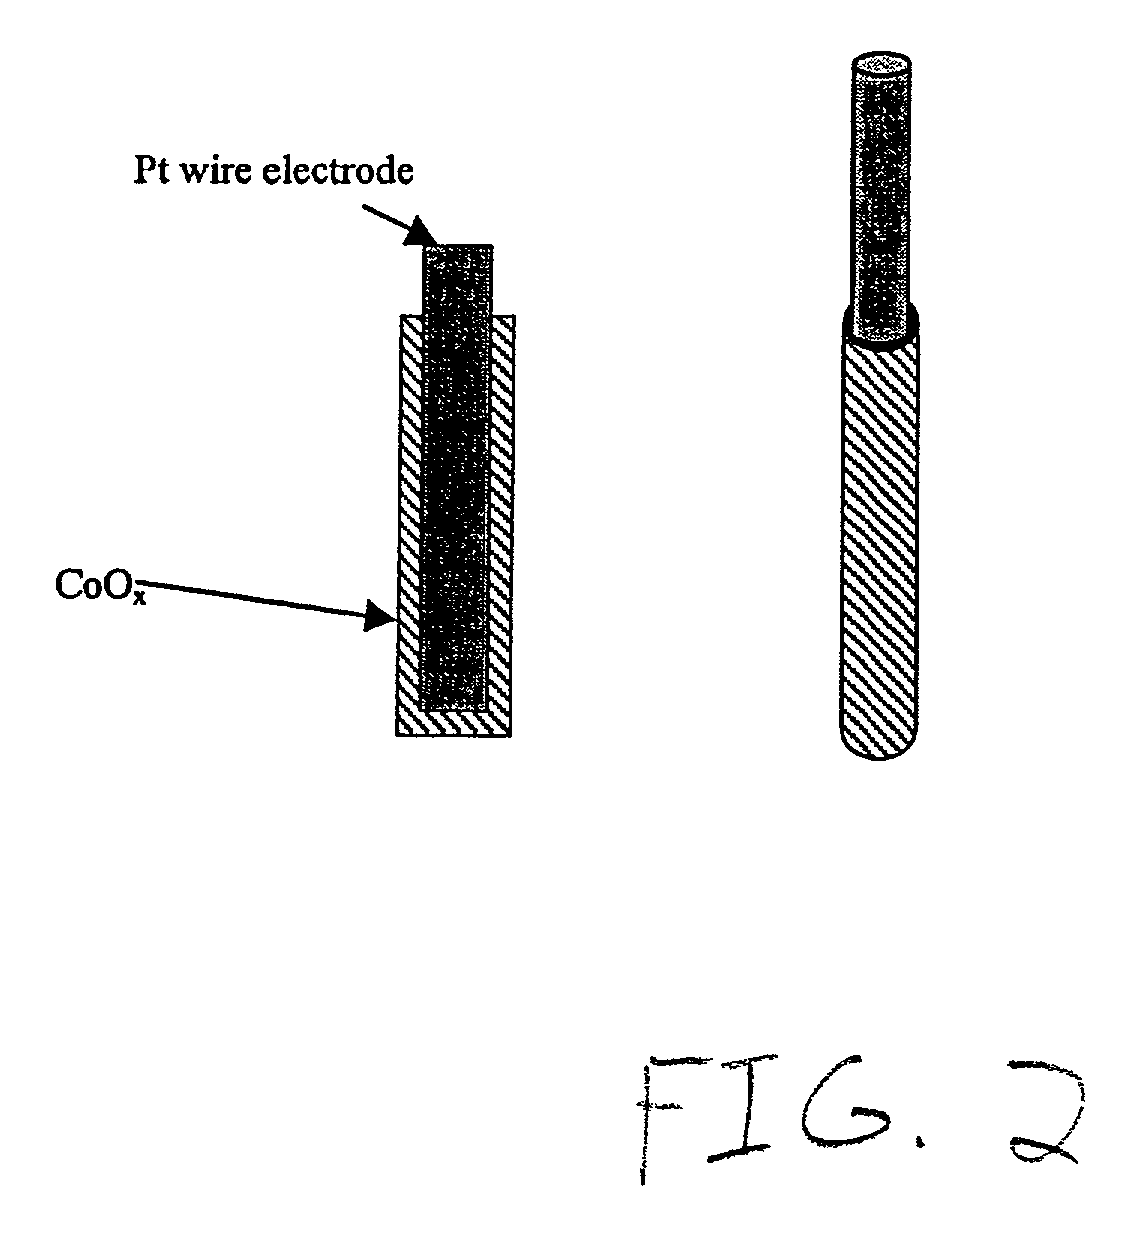 Methods and apparatus for the oxidation of glucose molecules